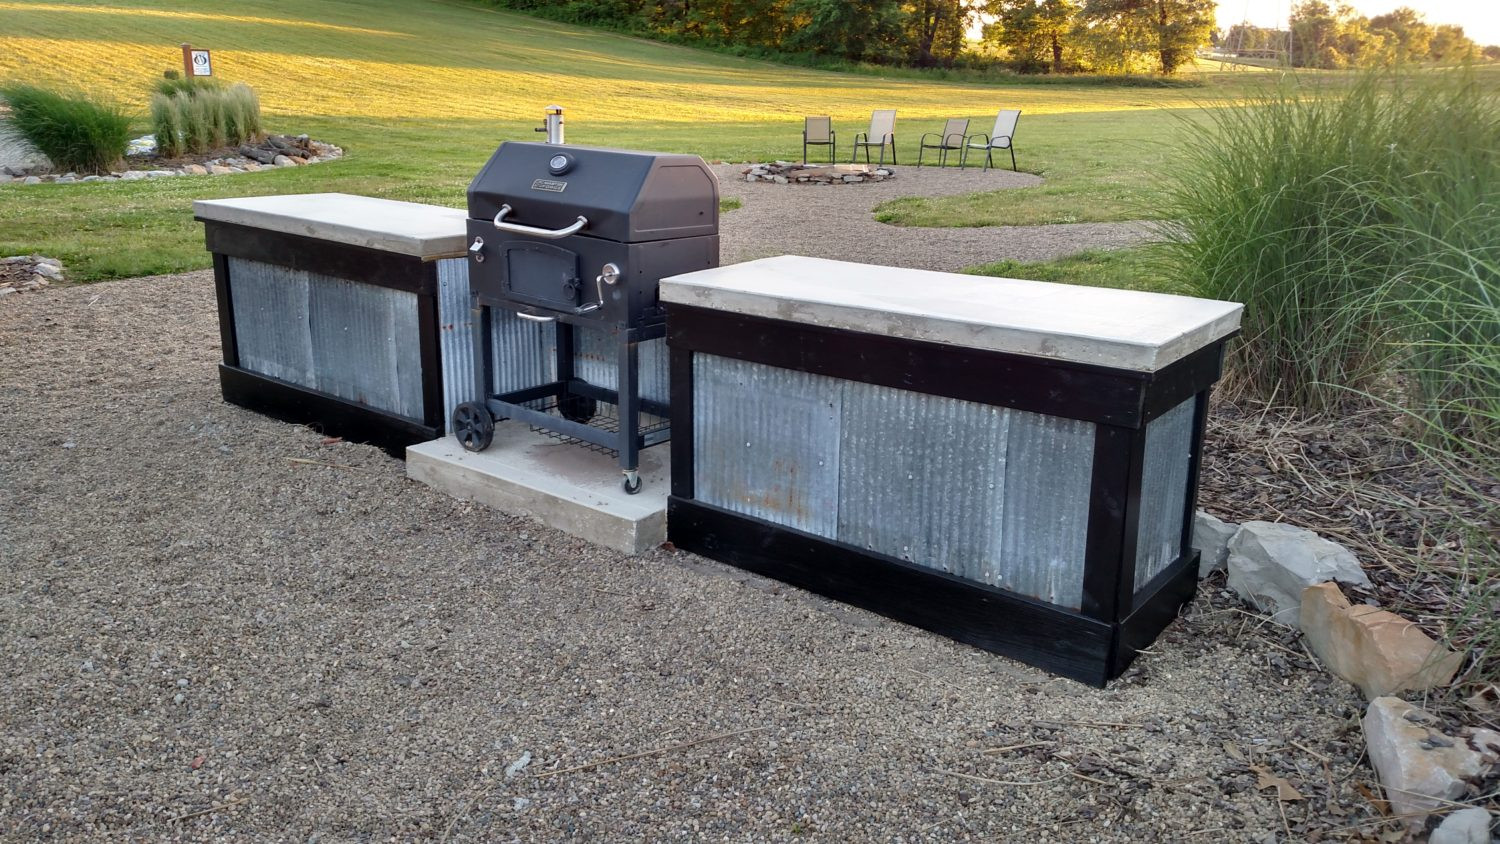 Cheap Outdoor Kitchen
 Creating An Inexpensive Outdoor Kitchen With Concrete